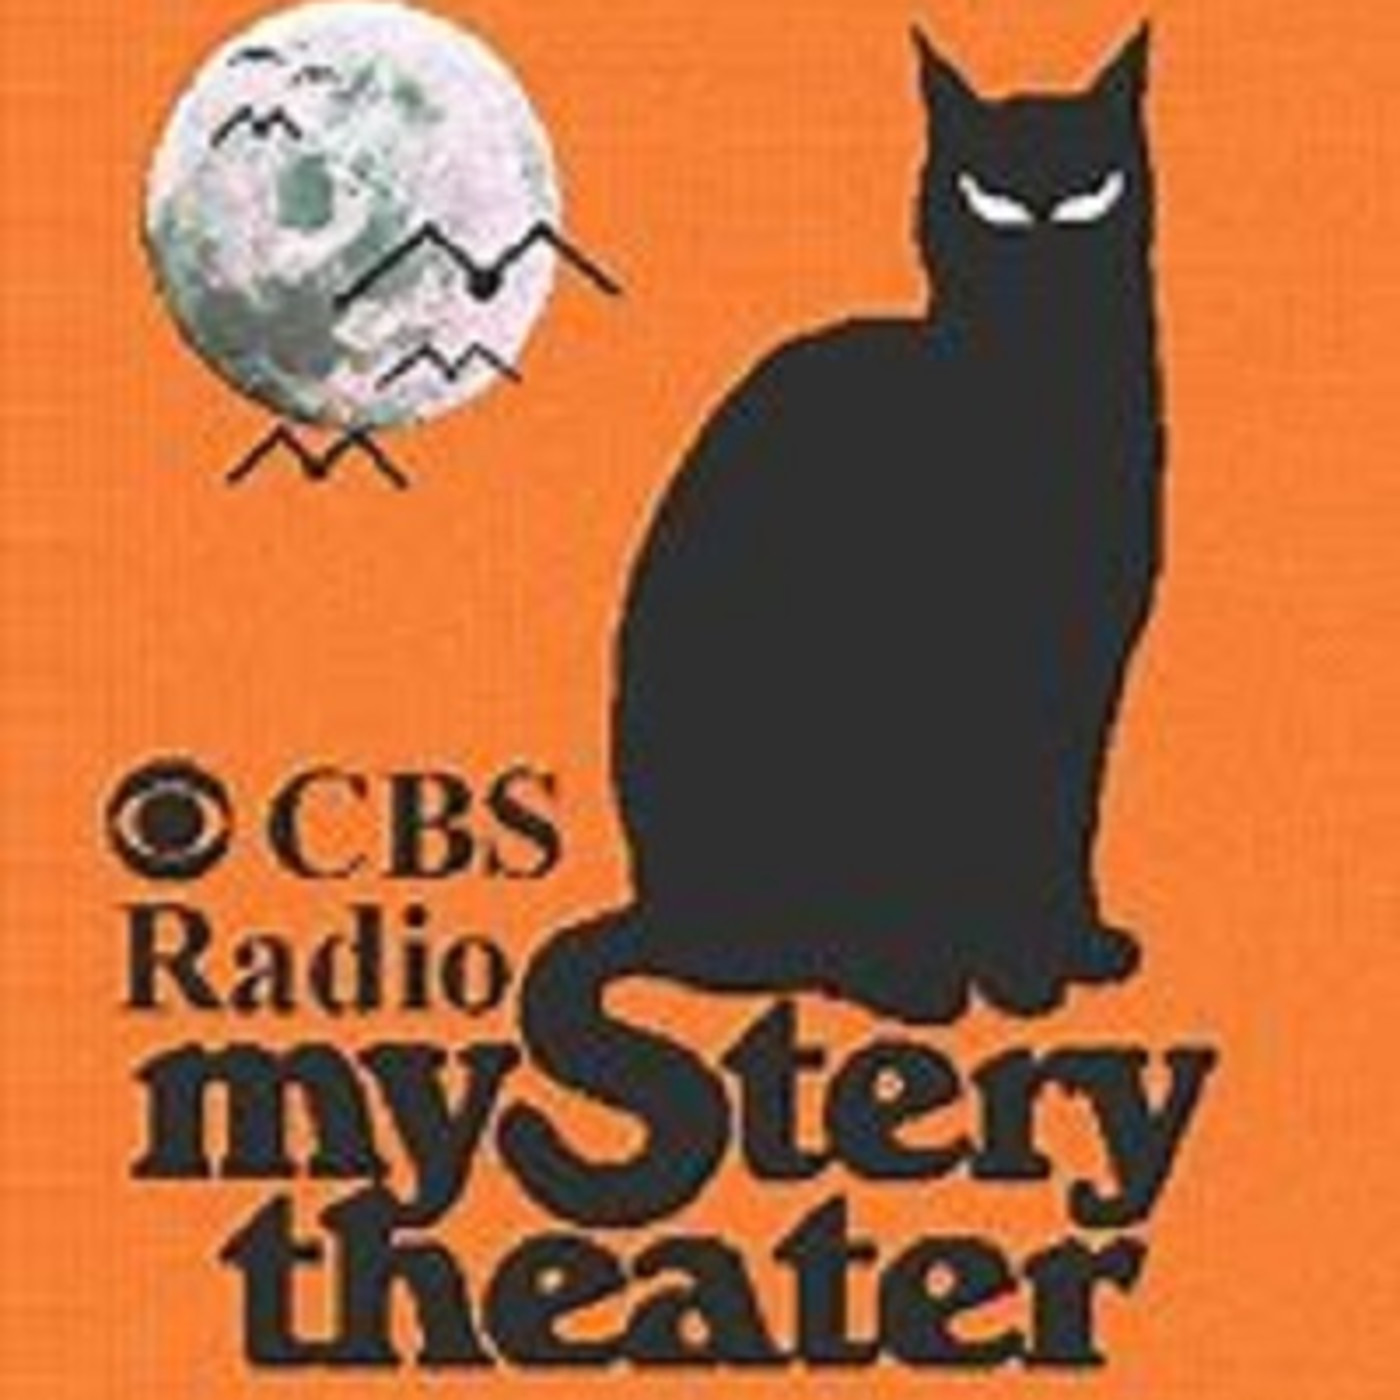 CBS Radio Mystery Theater_76-03-18_(0450)_The Other Side Of The Coin (1)